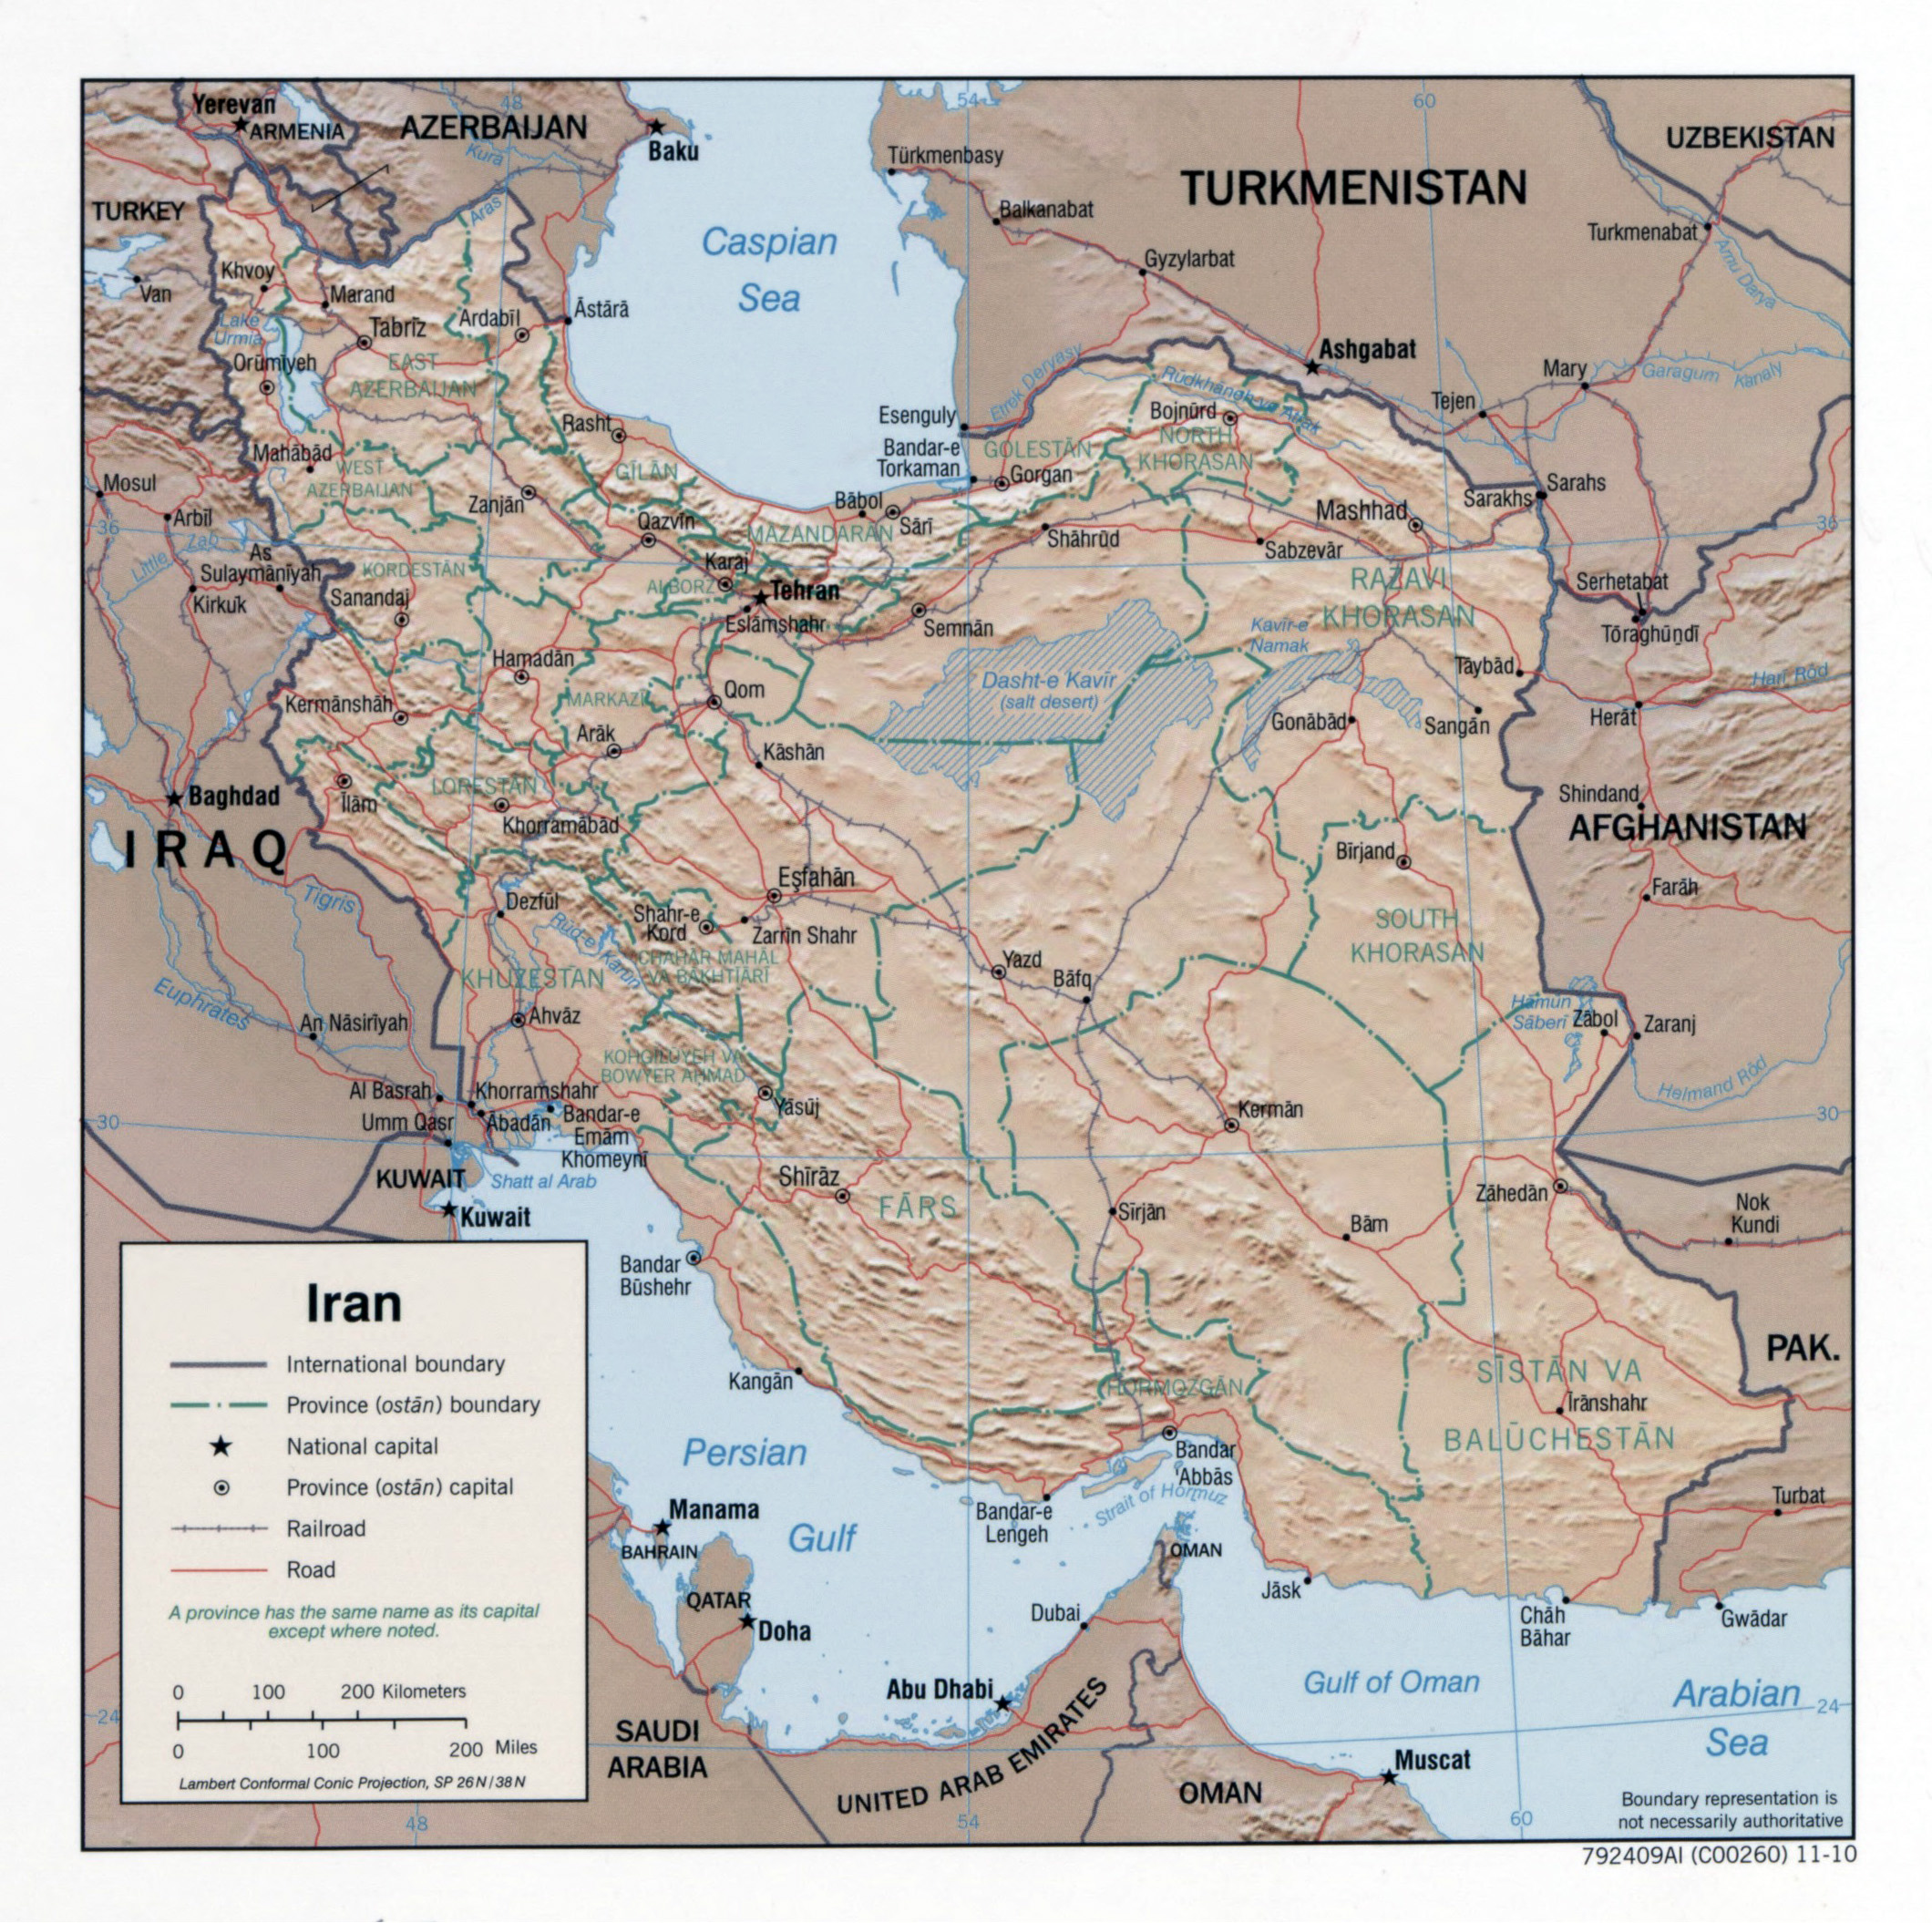 Large Detailed Political And Administrative Map Of Iran With Relief Roads Railroads And Major Cities 2010 